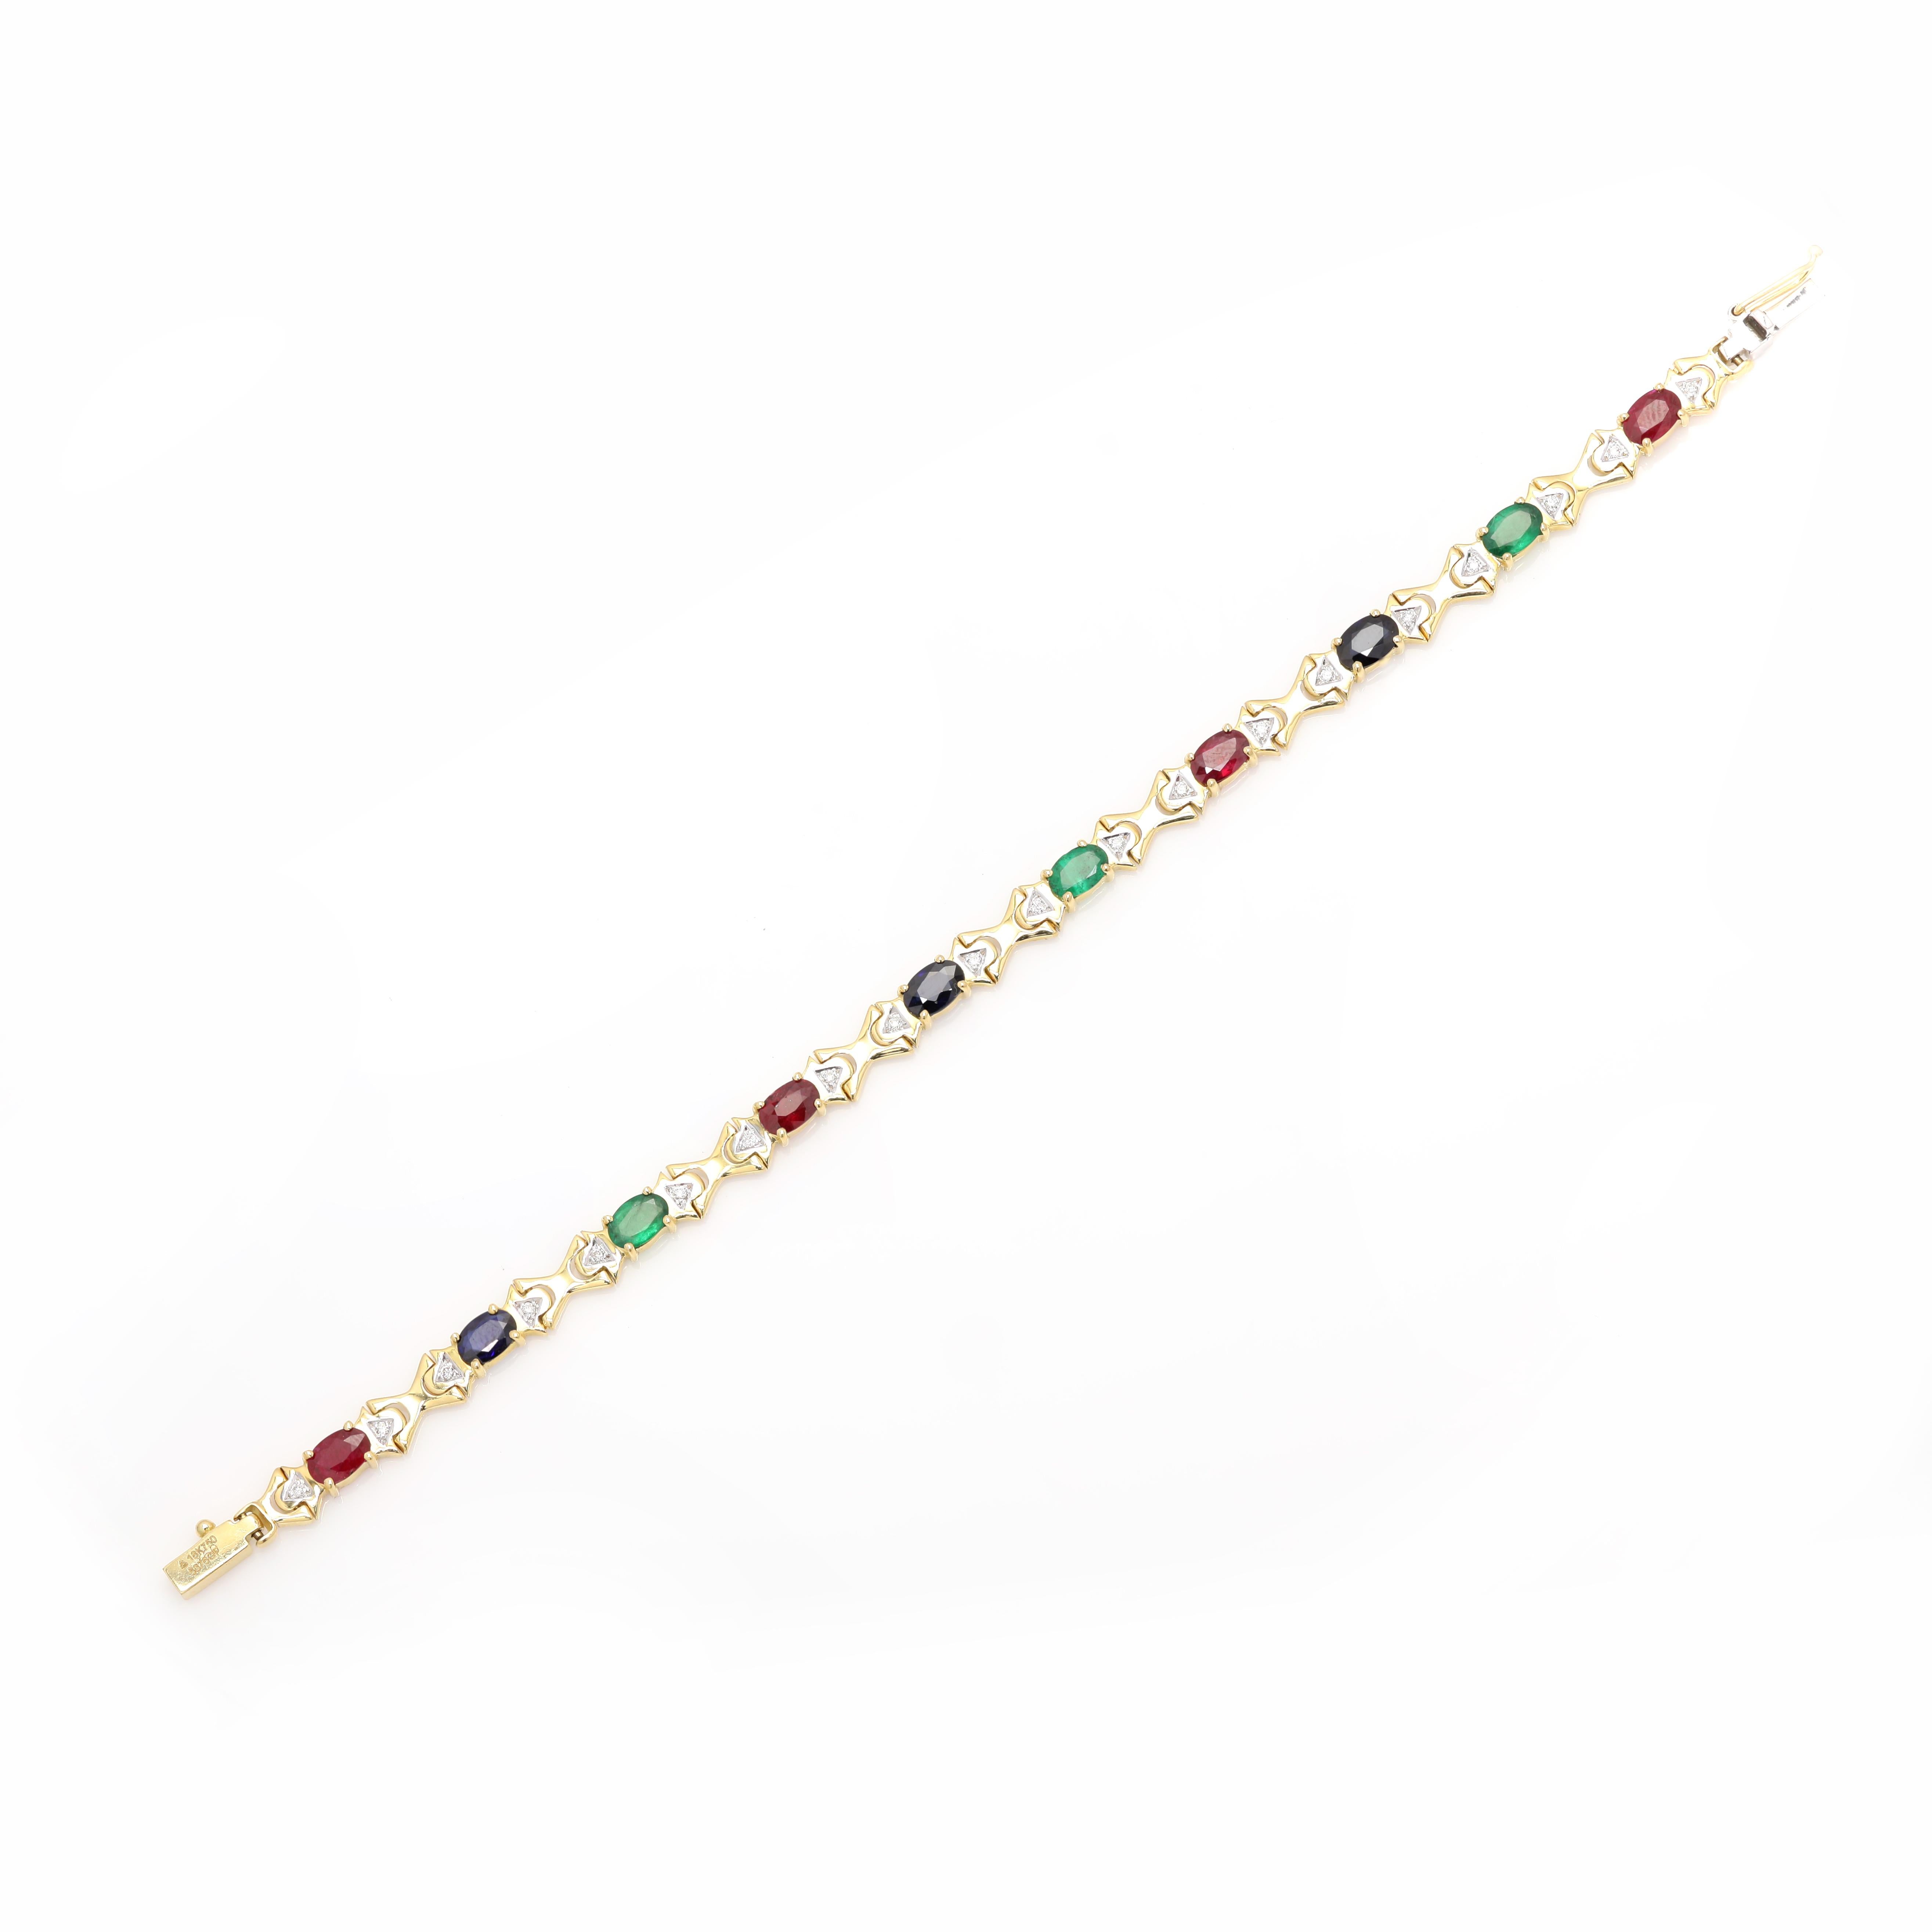 This Emerald, Ruby, Sapphire and Diamond Tennis Bracelet Made in 18K gold showcases 10 endlessly sparkling natural emerald, ruby and sapphire weighing 5.4 carats. It measures 7 inches long in length. Emerald enhances the intellectual capacity of the